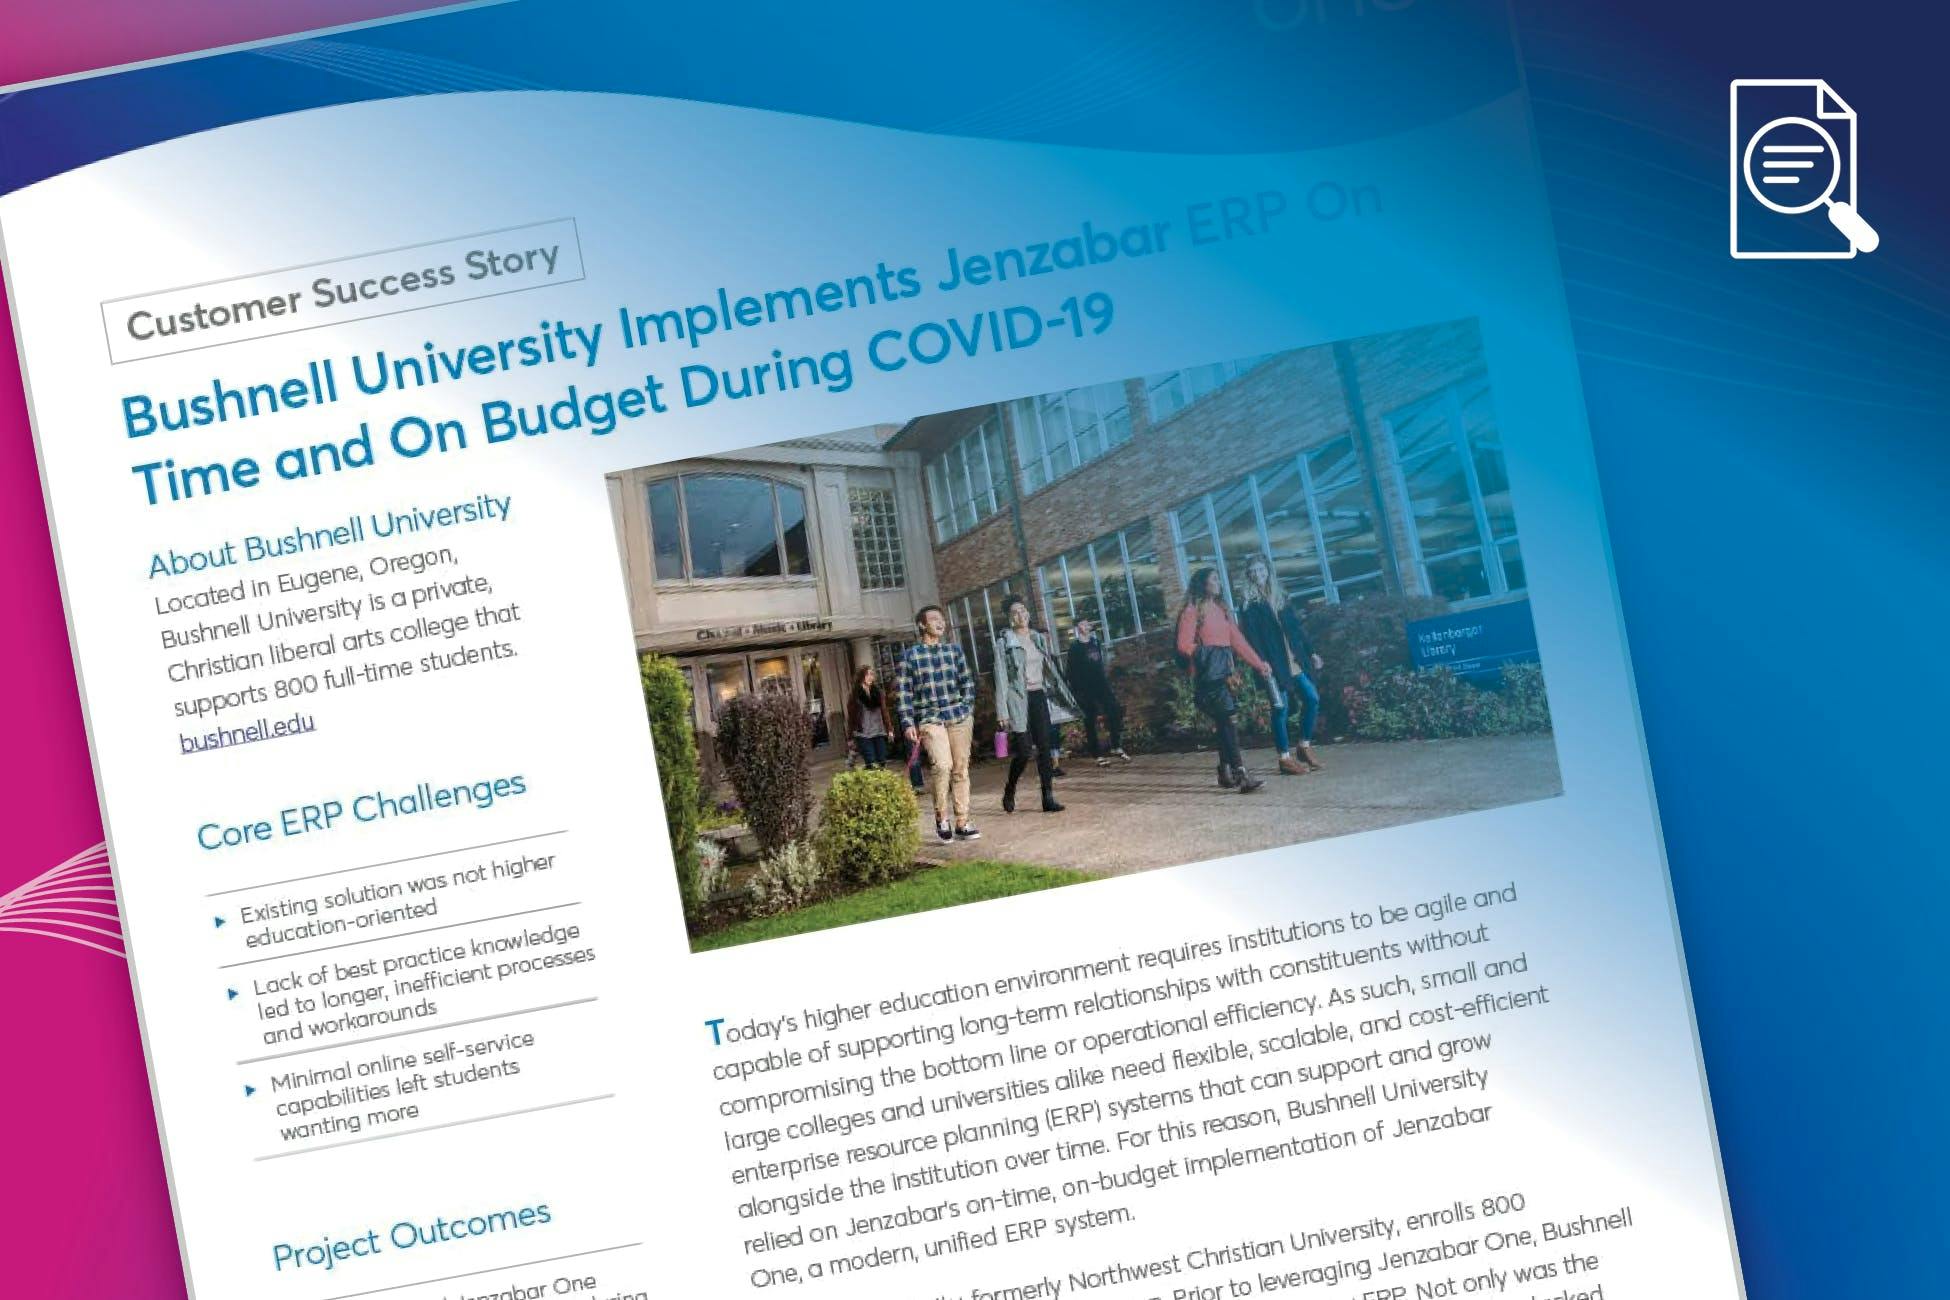 Success Story: Bushnell University Implements Jenzabar ERP On Time and On Budget During COVID-19